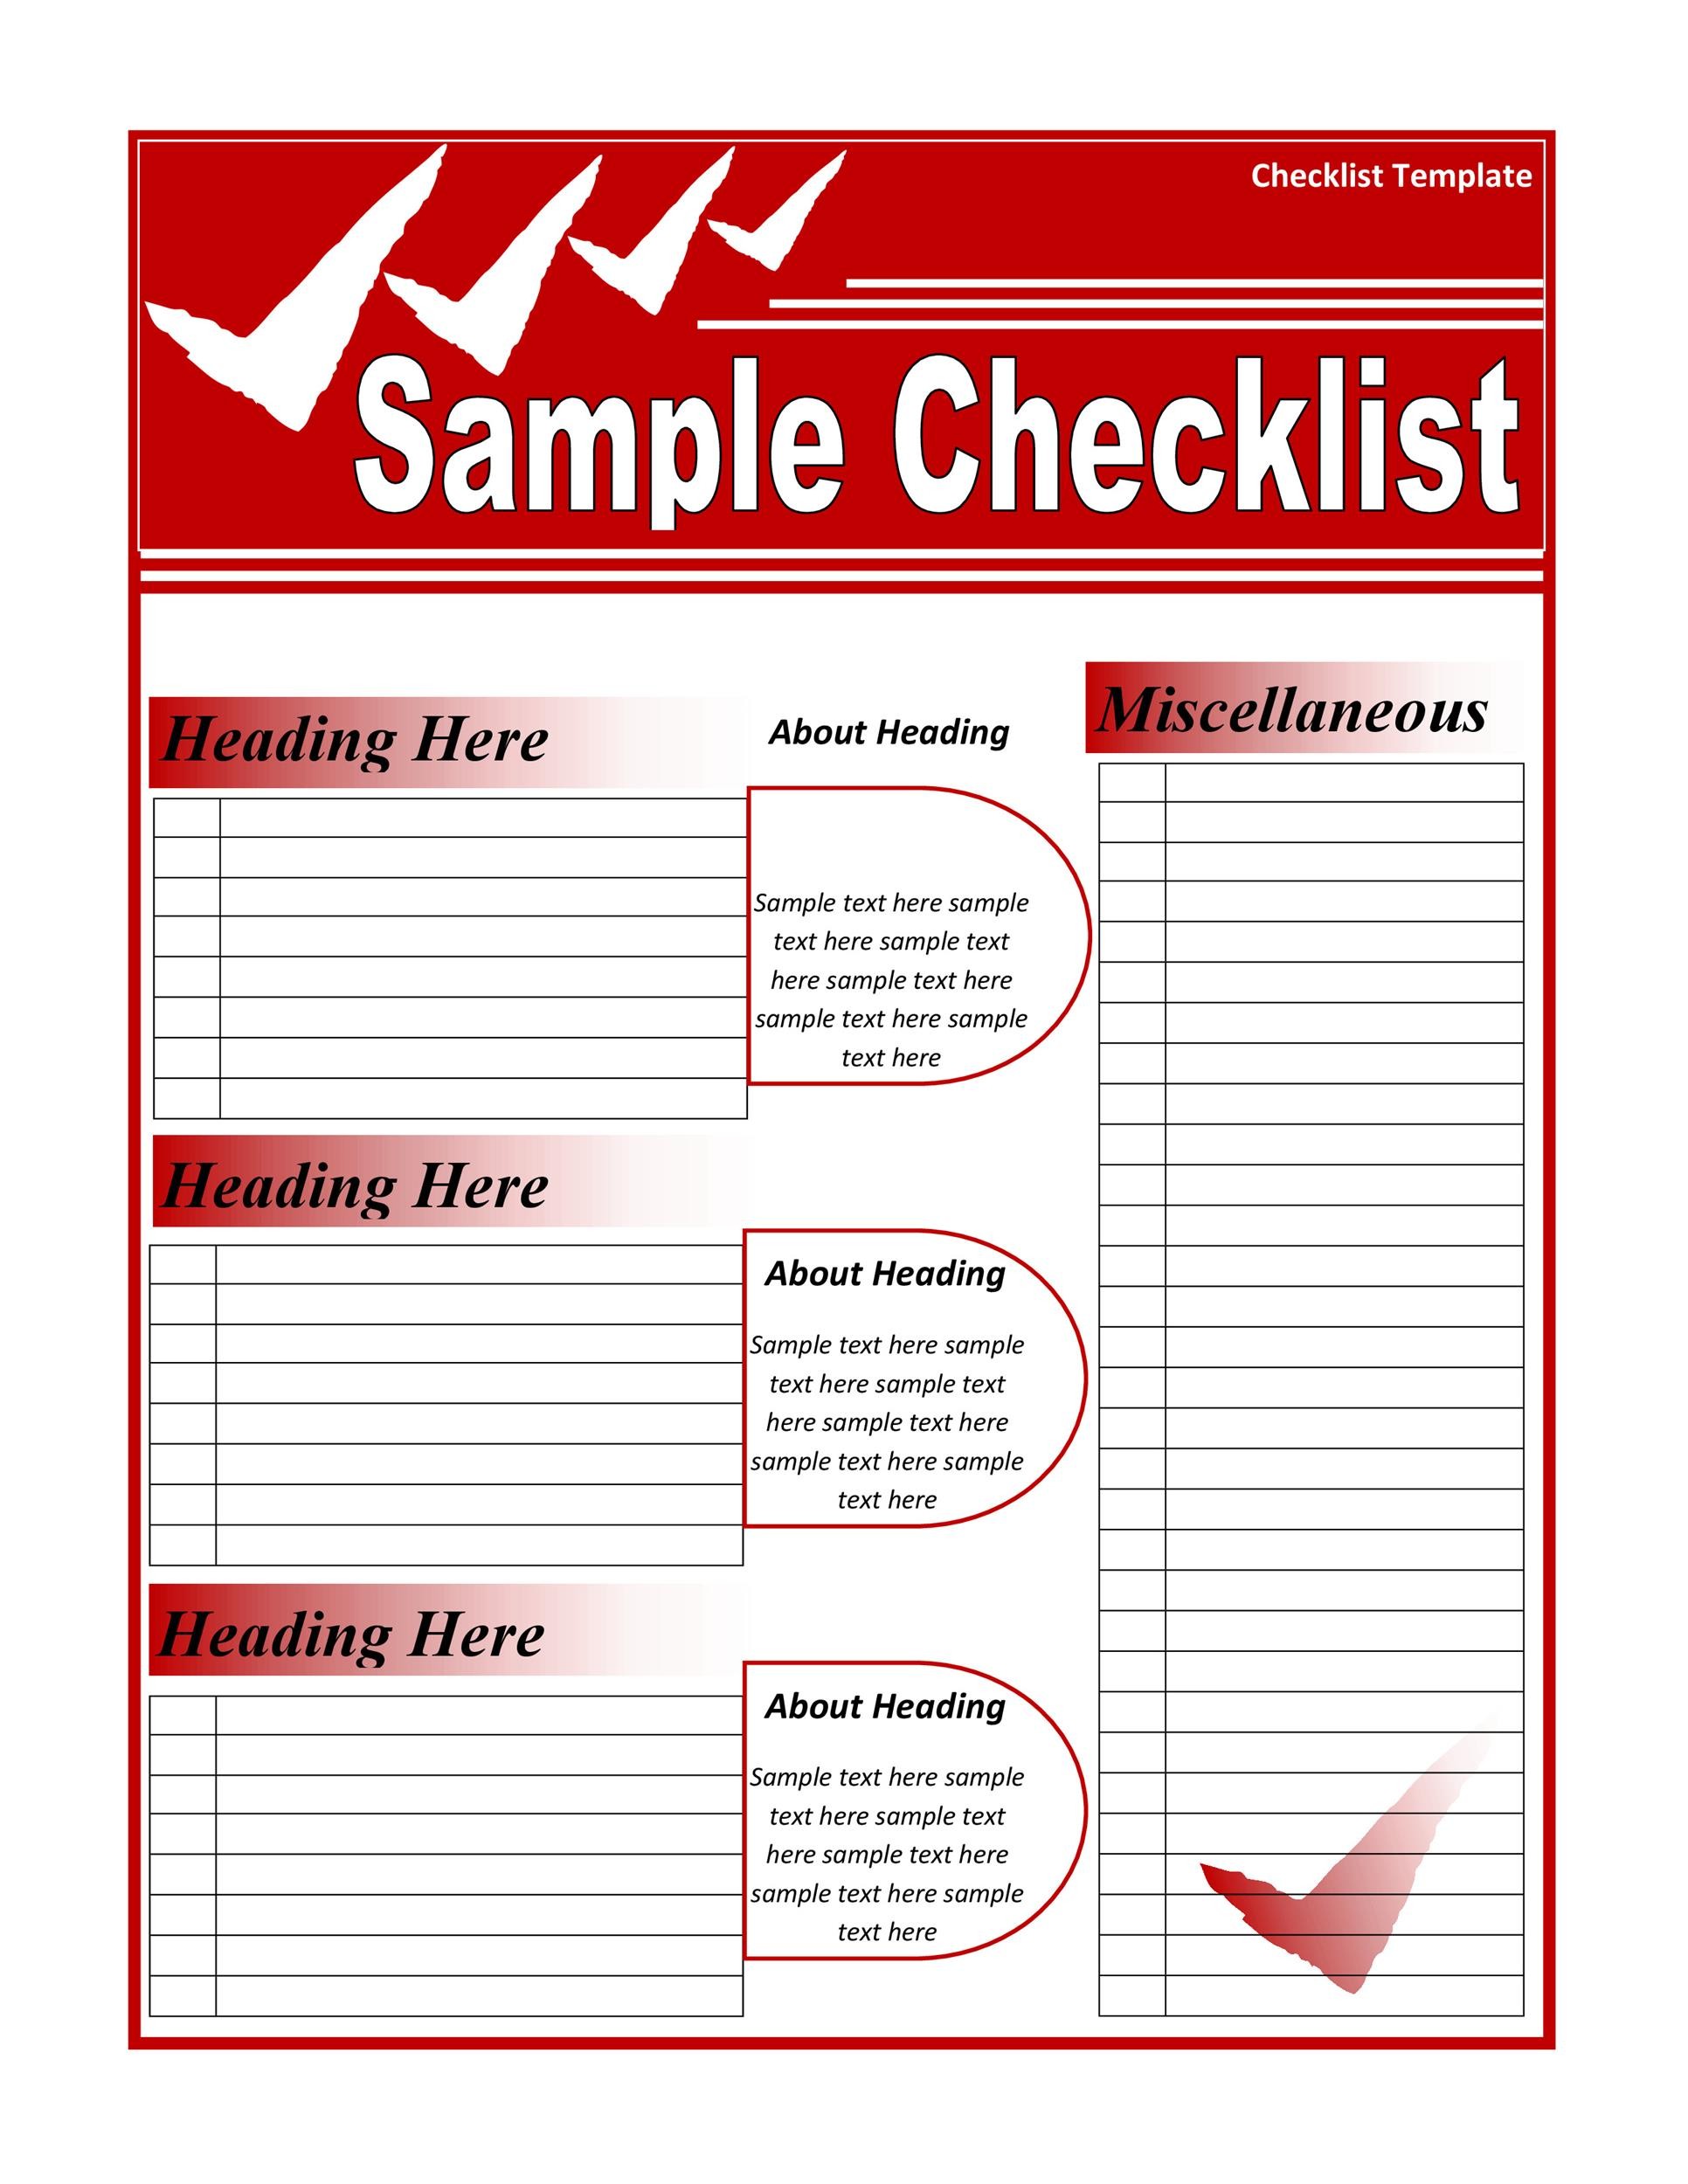 requirements-checklist-excel-samples-requirements-spreadsheet-template-excelxo-so-let